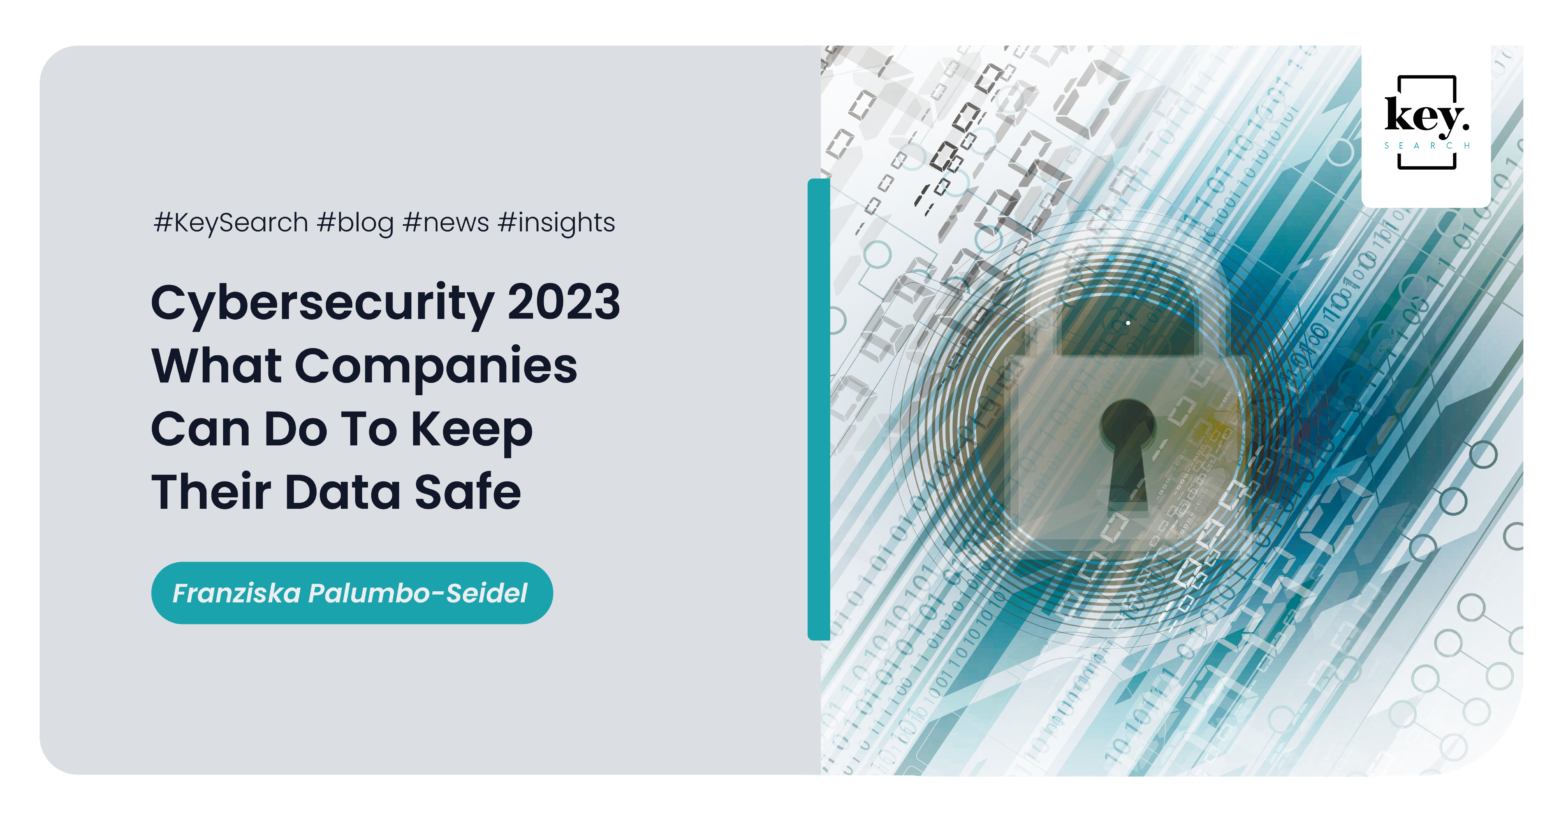 Cybersecurity 2023<br>Data Breaches, Cybersecurity Facts, and what Companies Can Do to Keep their Data Safe